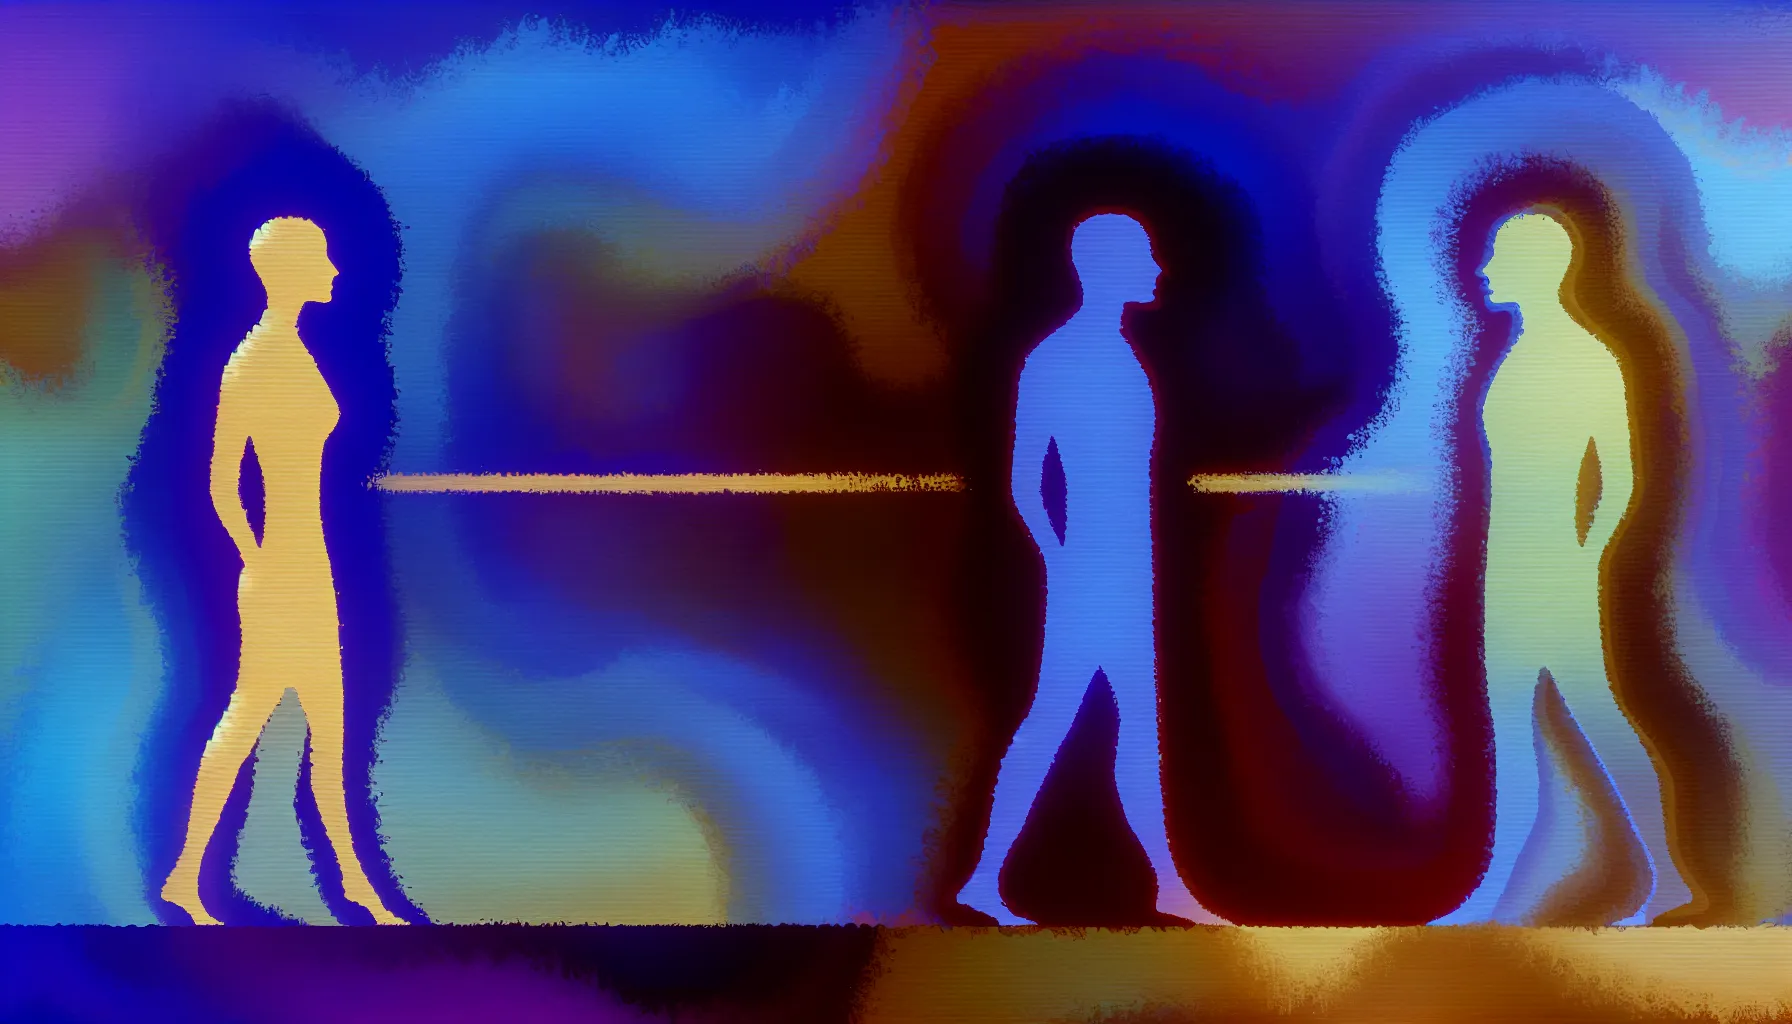 Two silhouettes standing apart, symbolizing emotional distance